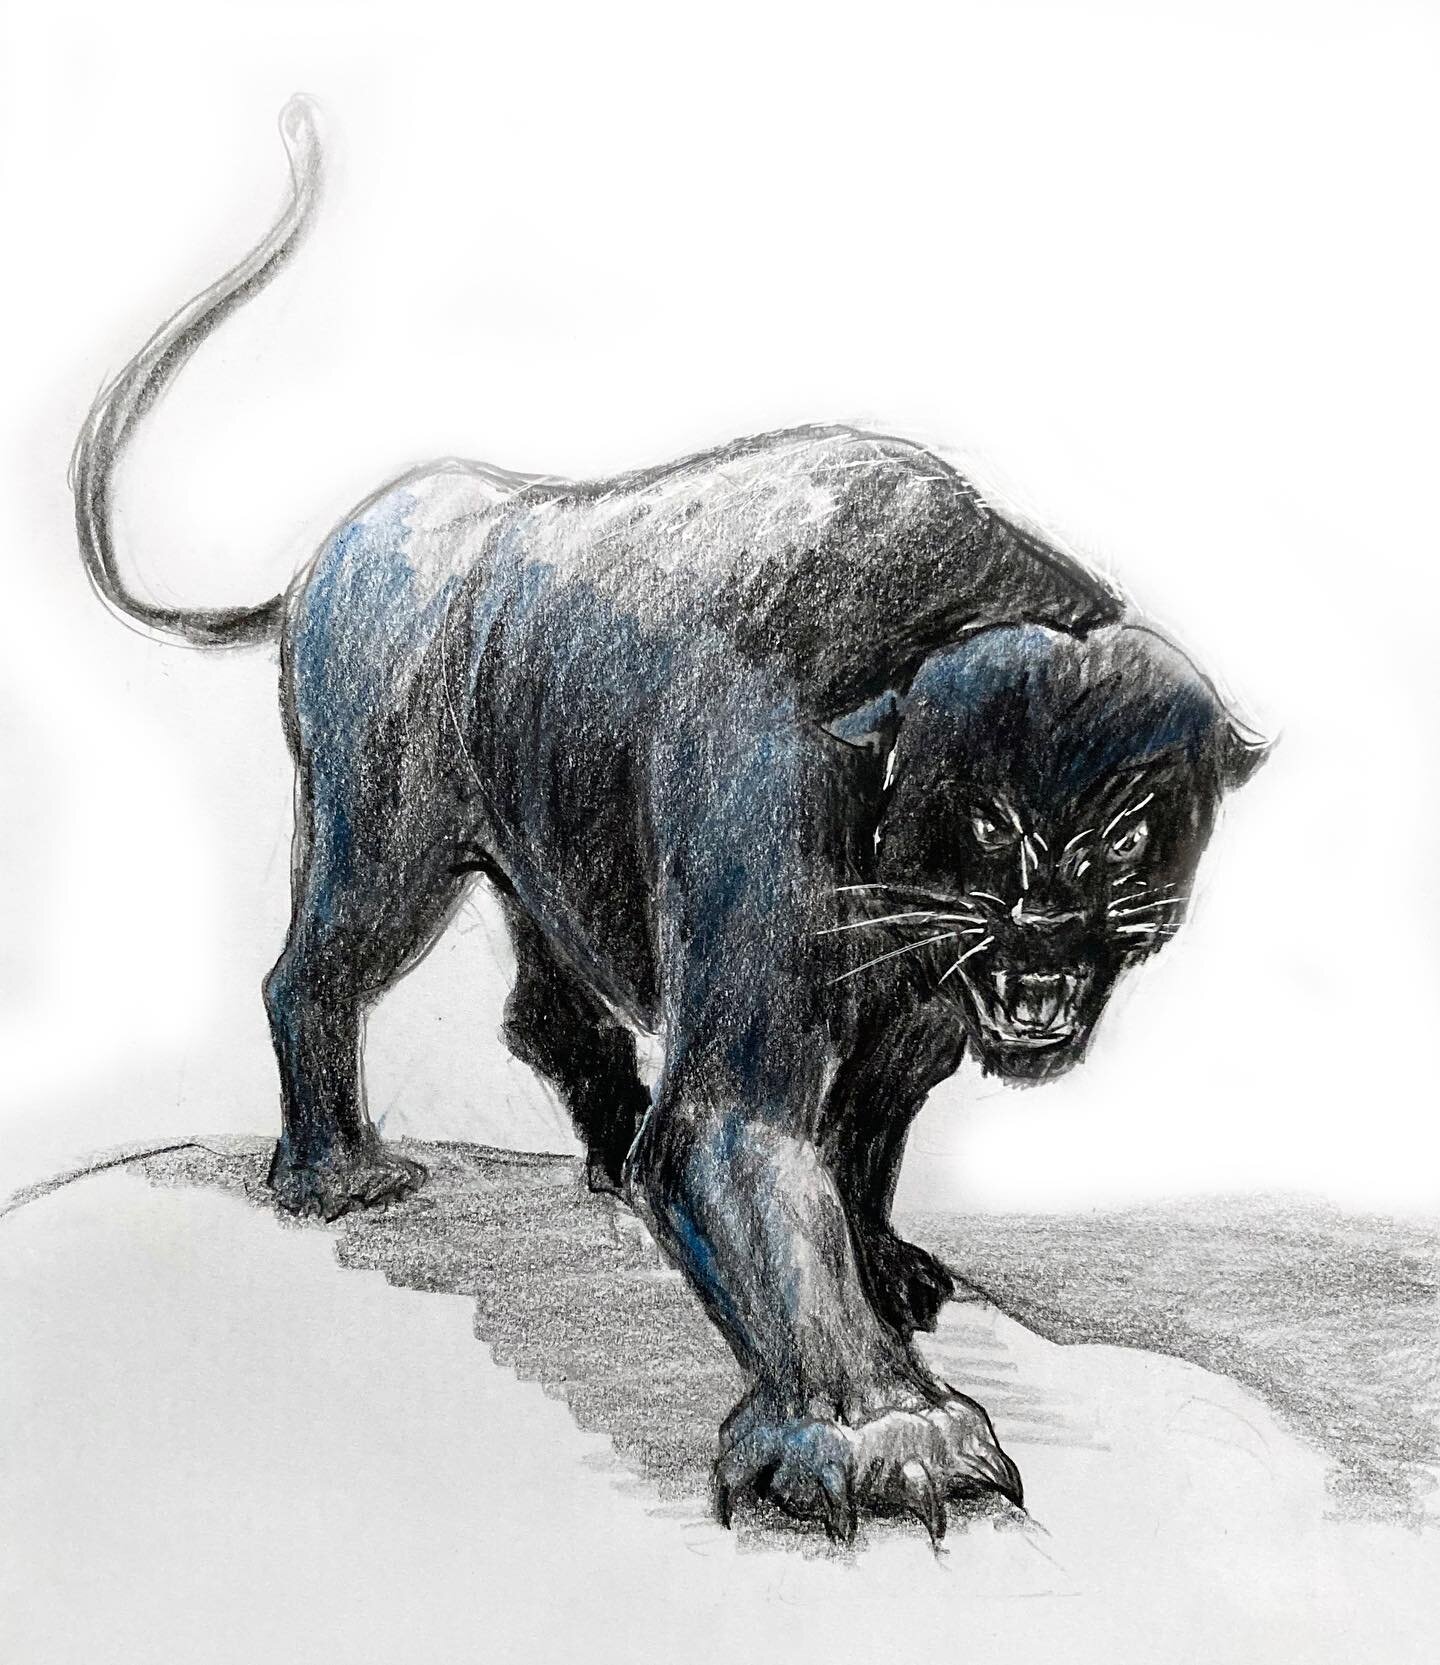 This is the colored pencil artwork Panther showed to our colored pencil students! Call us if you are interested in taking colored pencil class with us!! 😀😀😀😀
#charlotteartstudio  #parents #art #fineart #creativity #arteducation #elementaryart #ch